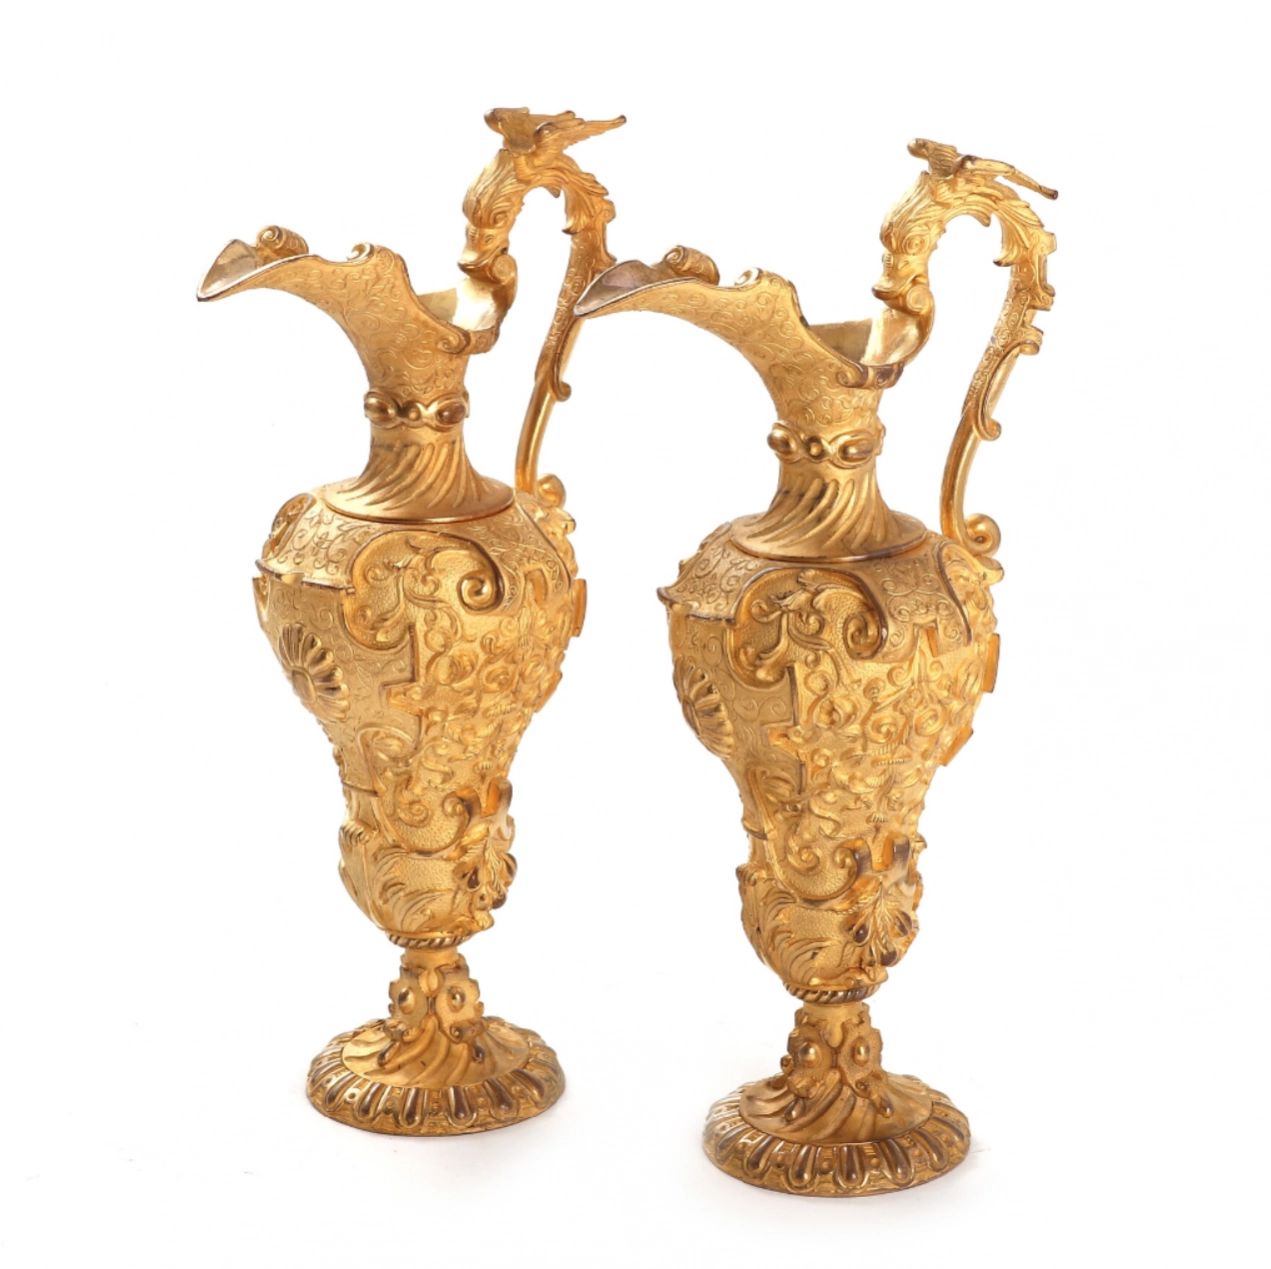 A-pair-of-decorative-gilded-jugs-